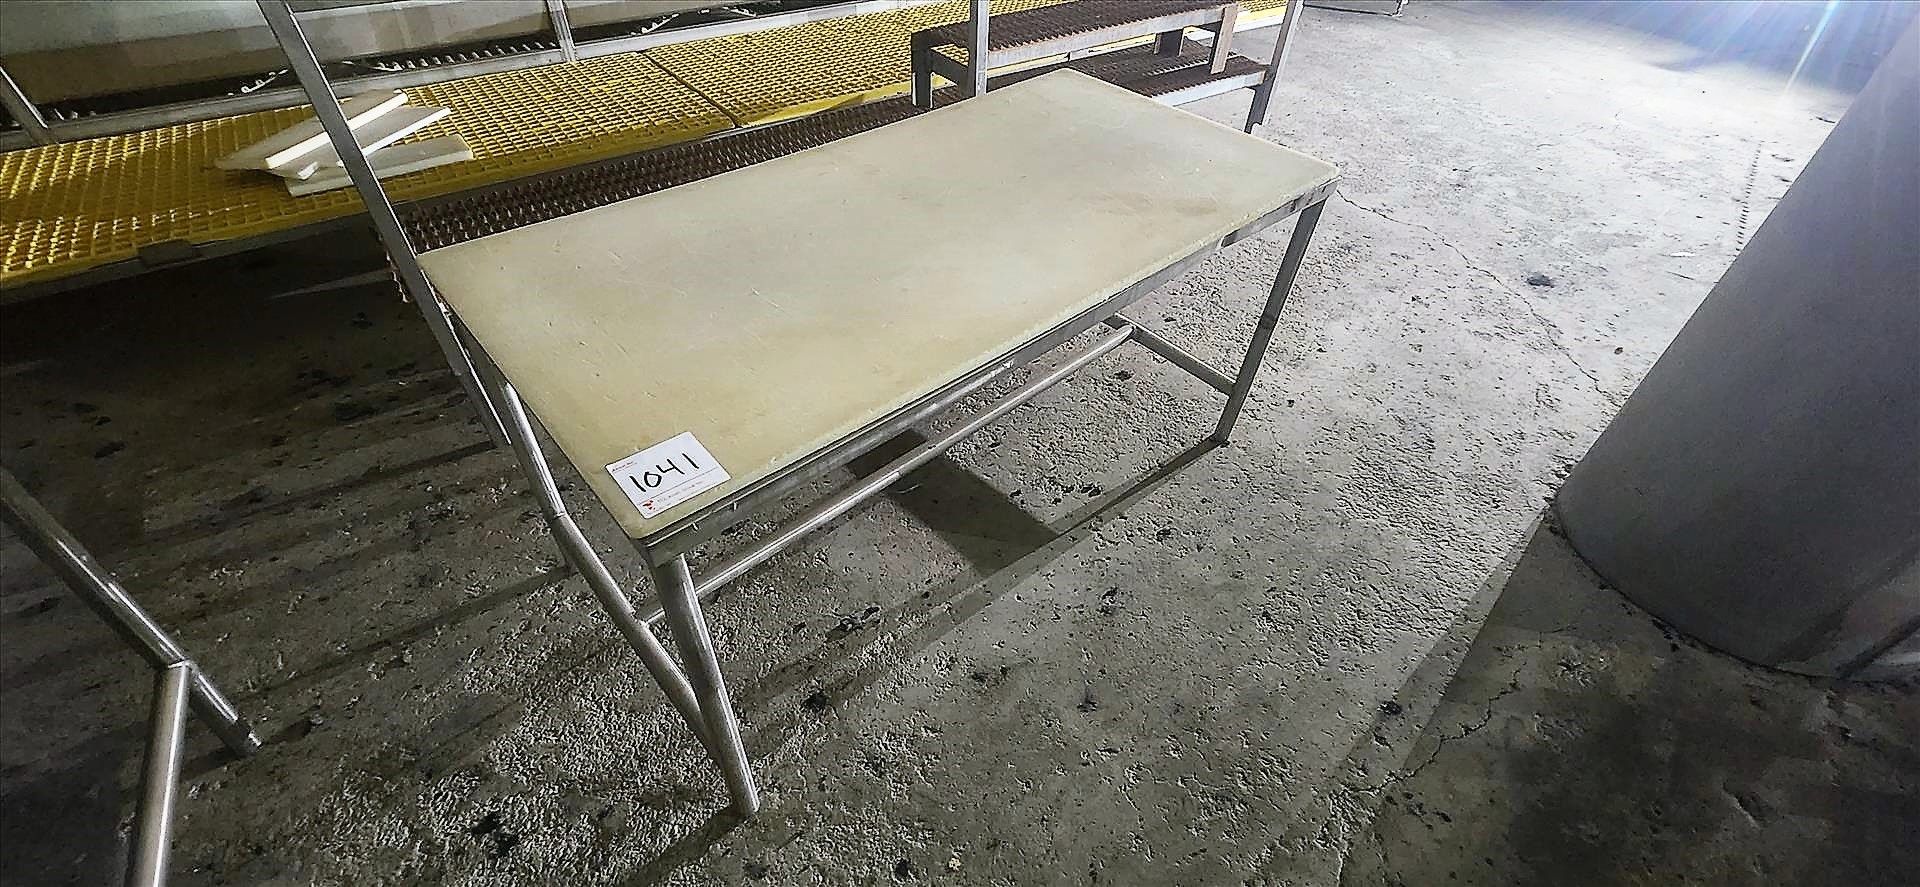 table, stainless steel, approx. 30 in. x 60 in. w/ HDPE top [TAG 1041 - LOC Paletta Cr.]